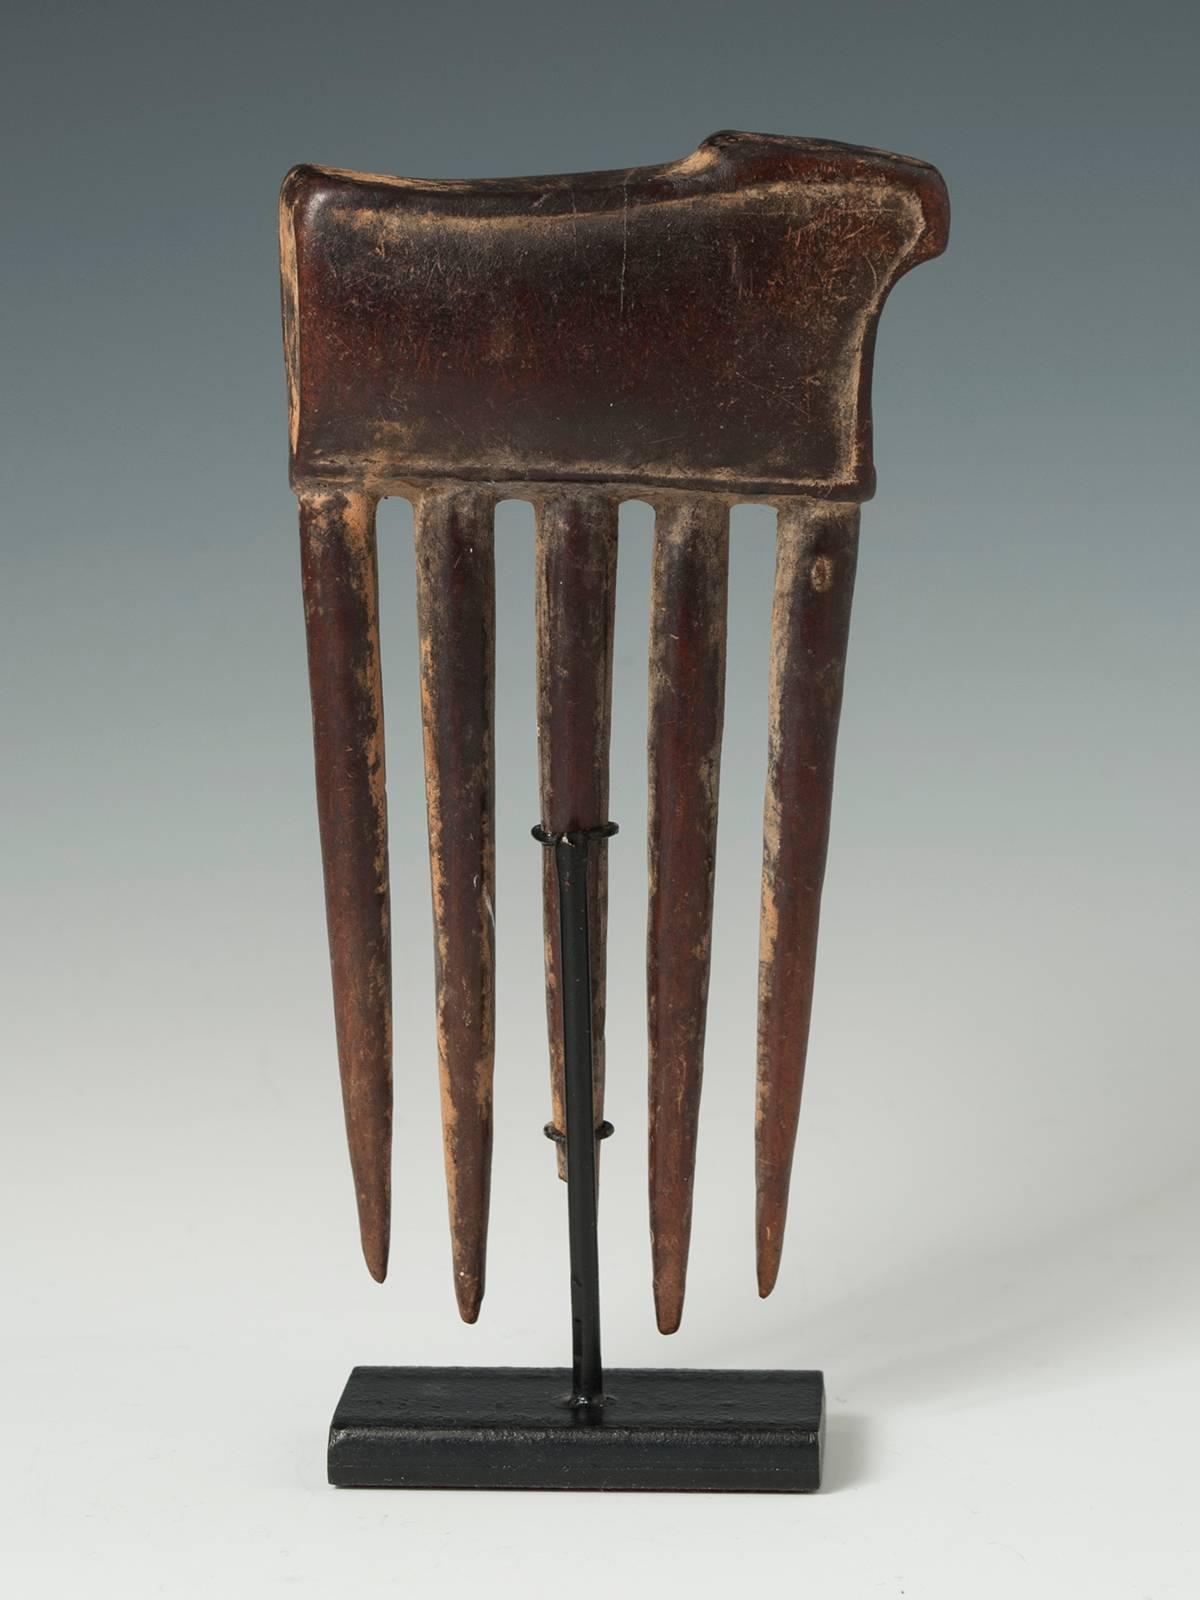 Ivorian Mid-20th Century Tribal African Wood Comb from the Baule, Cote d'Ivoire